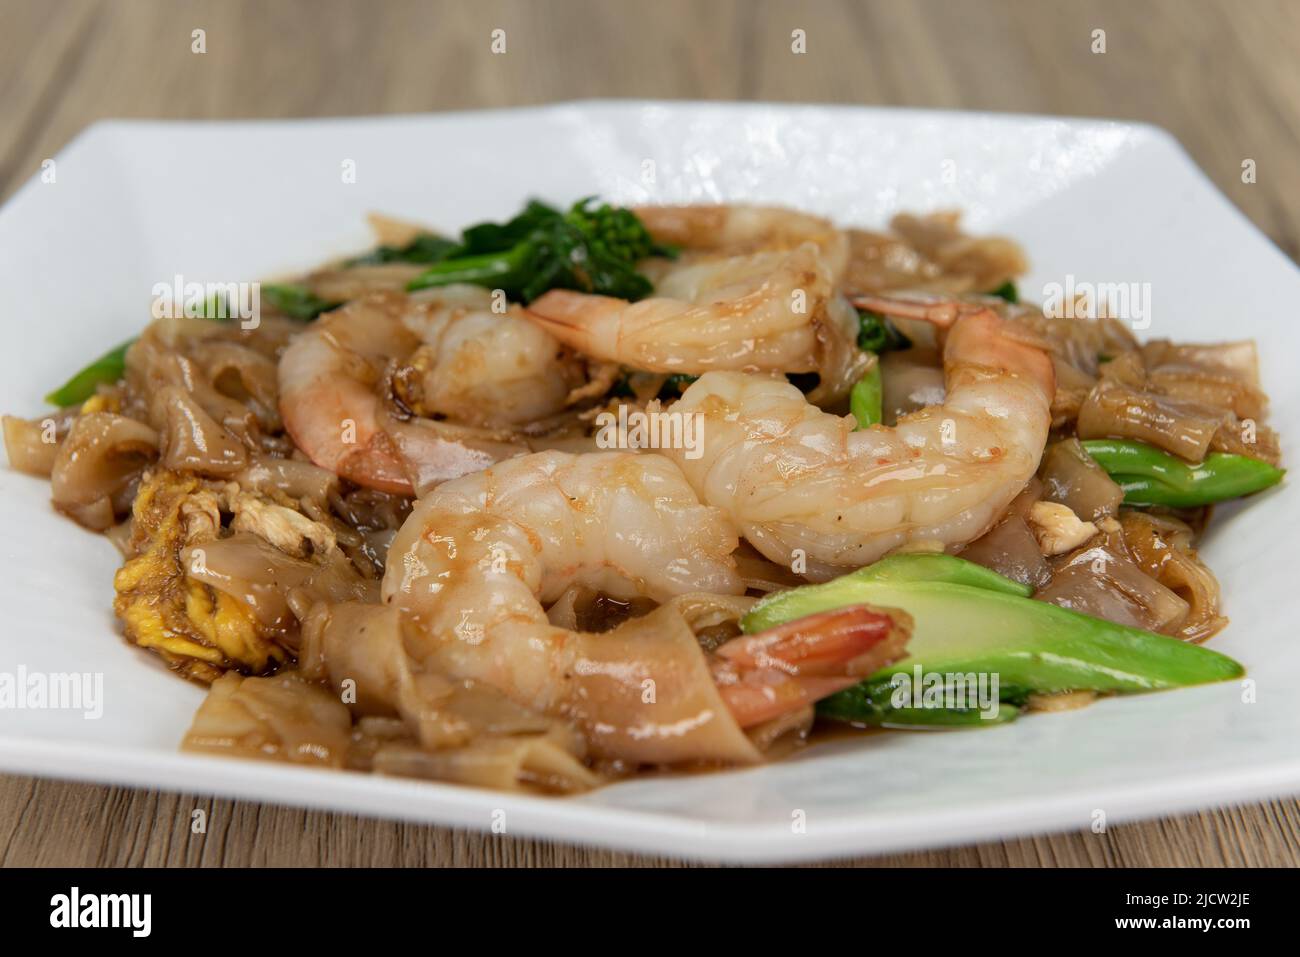 Appetizing plate of pad see-ew with large shrimp garnishing the top and ready to eat. Stock Photo